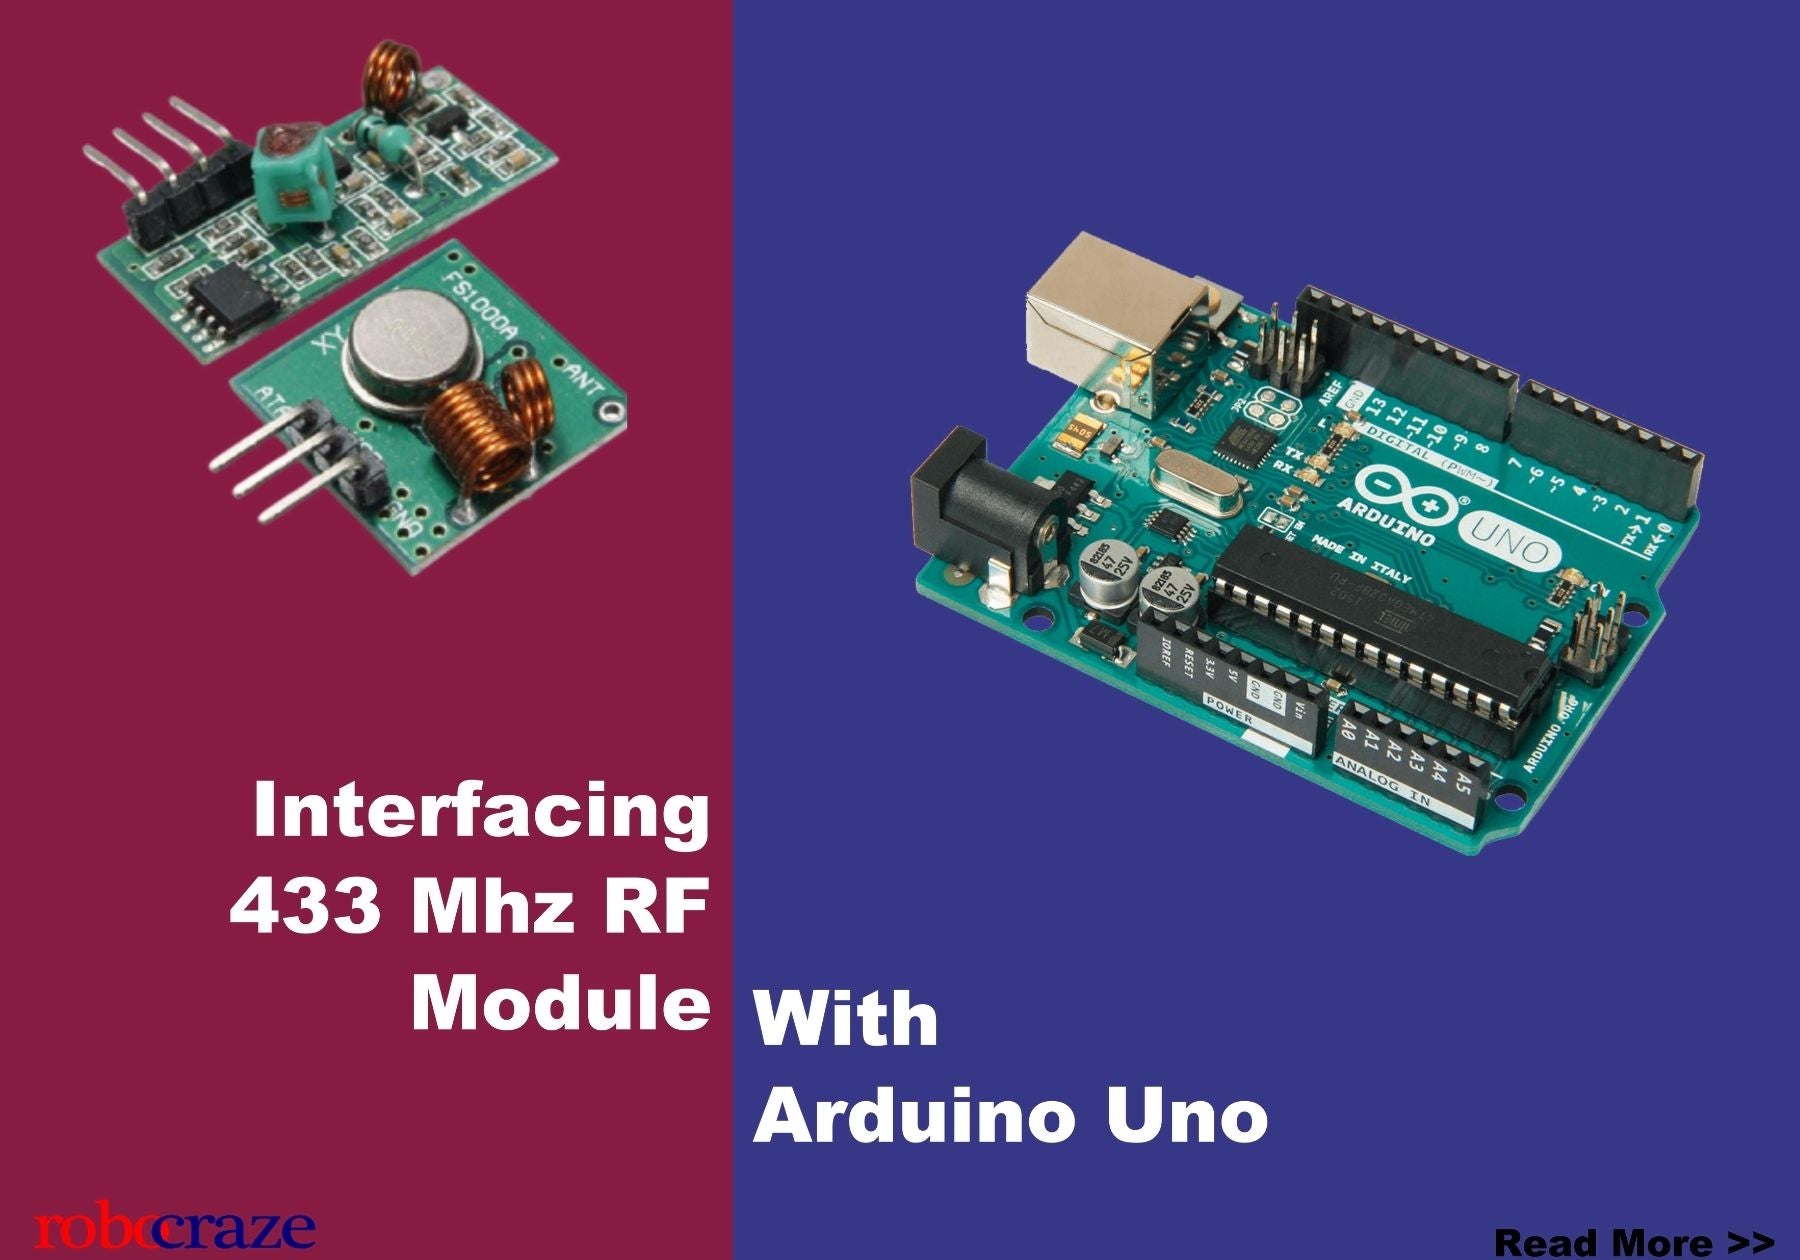 In-Depth: How nRF24L01 Wireless Module Works & Interface with Arduino